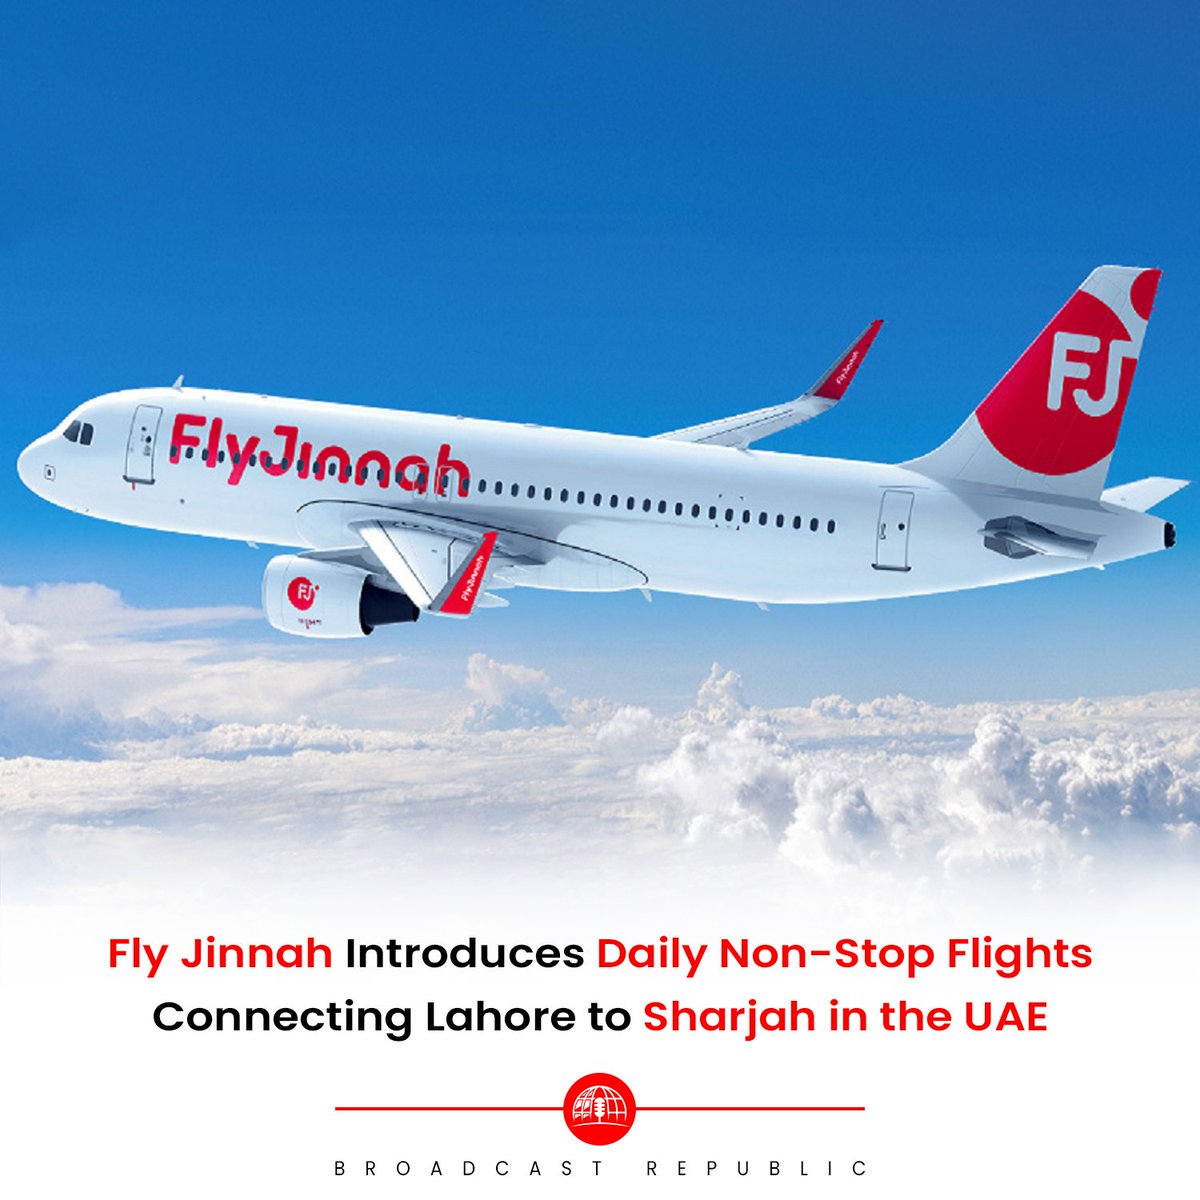 Fly Jinnah, Pakistan's leading low-cost carrier, announces the initiation of daily non-stop flights between Lahore and Sharjah, UAE, starting March 27, 2024. 

#BroadcastRepublic #FlyJinnah #LahoreSharjahRoute #AffordableTravel #NonStopFlights